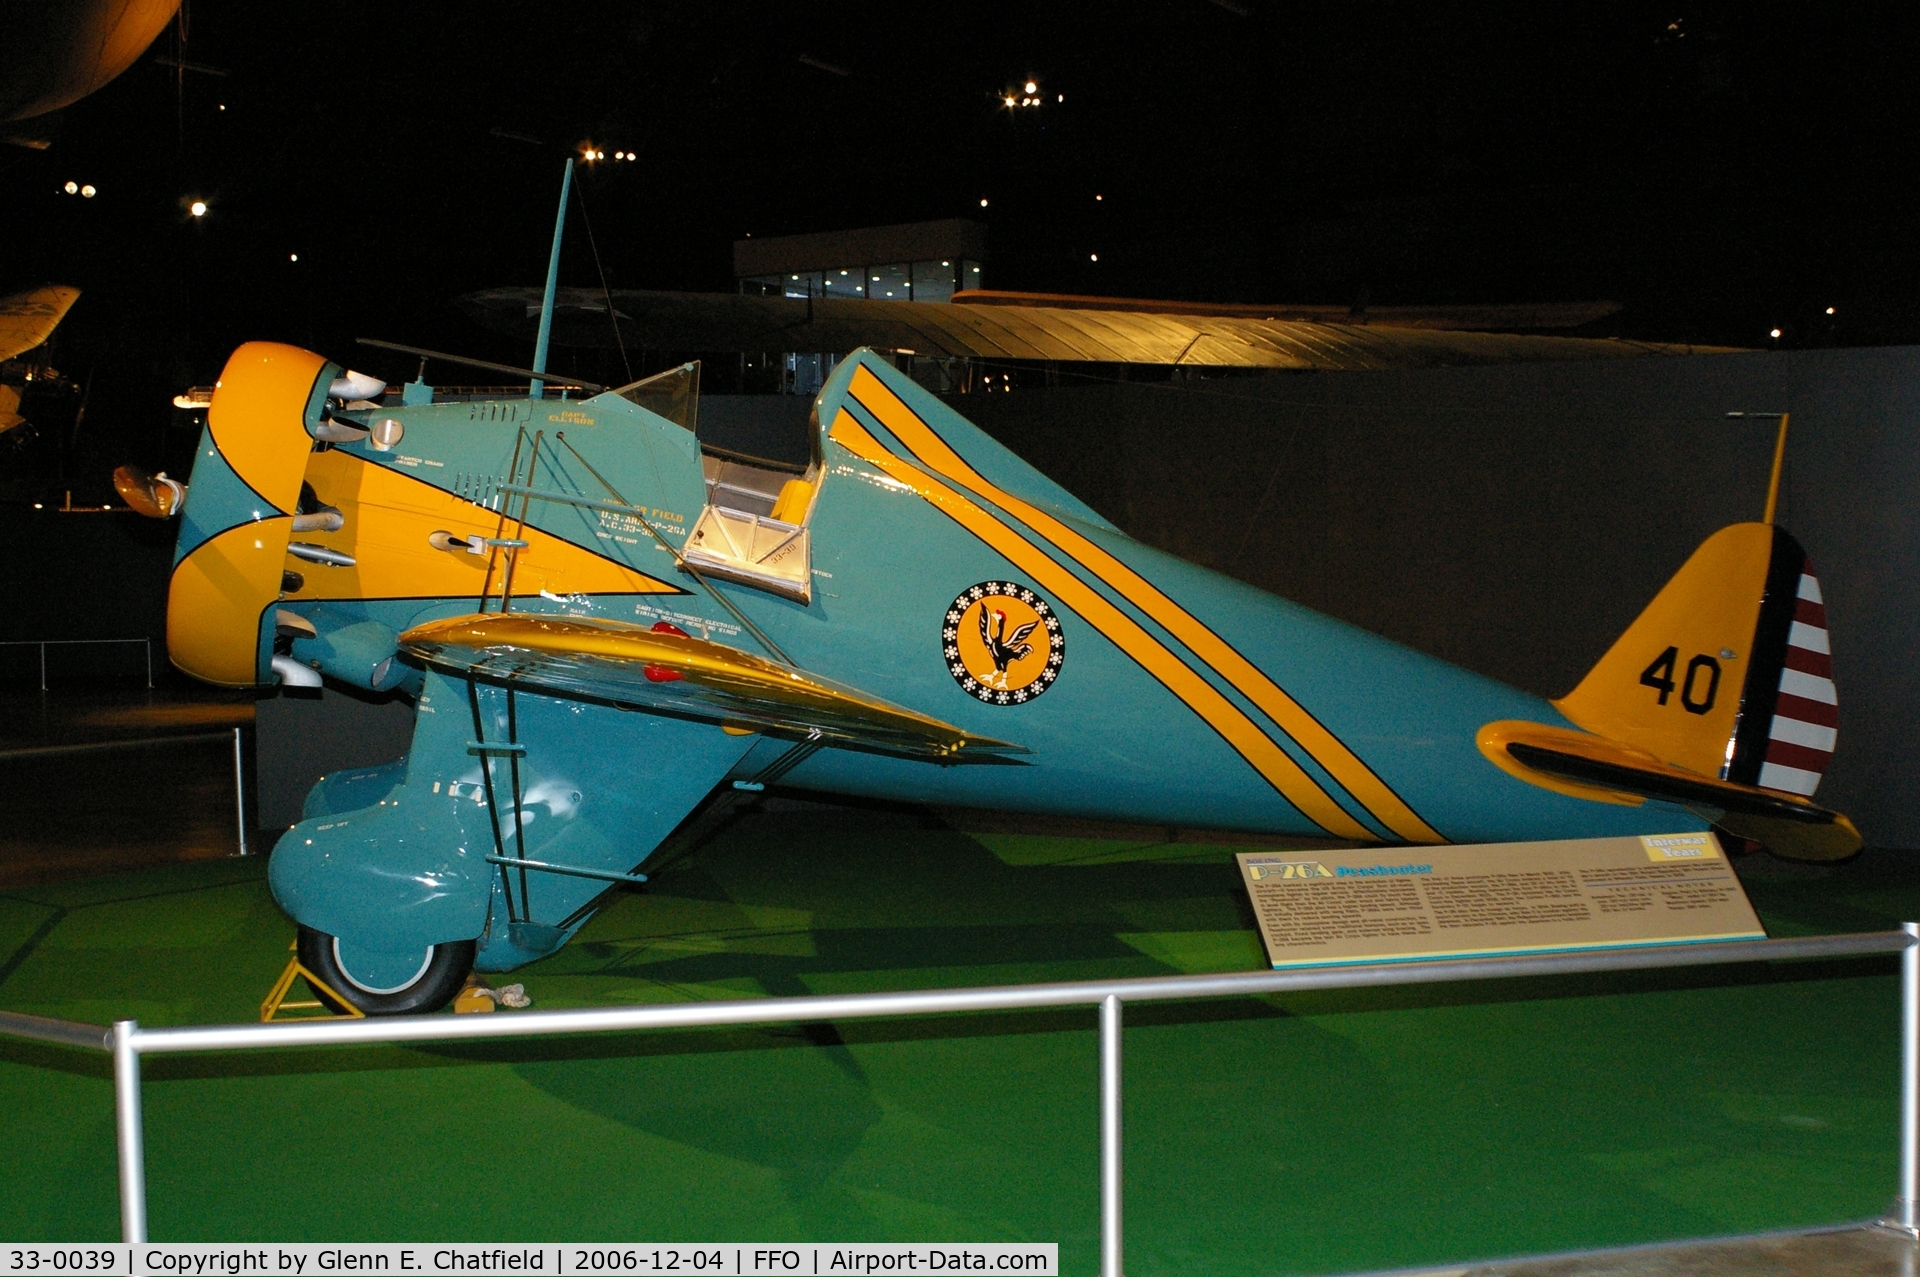 33-0039, 1933 Boeing P-26A Replica C/N 1815, P-26A reproduction at the National Museum of the U.S. Air Force